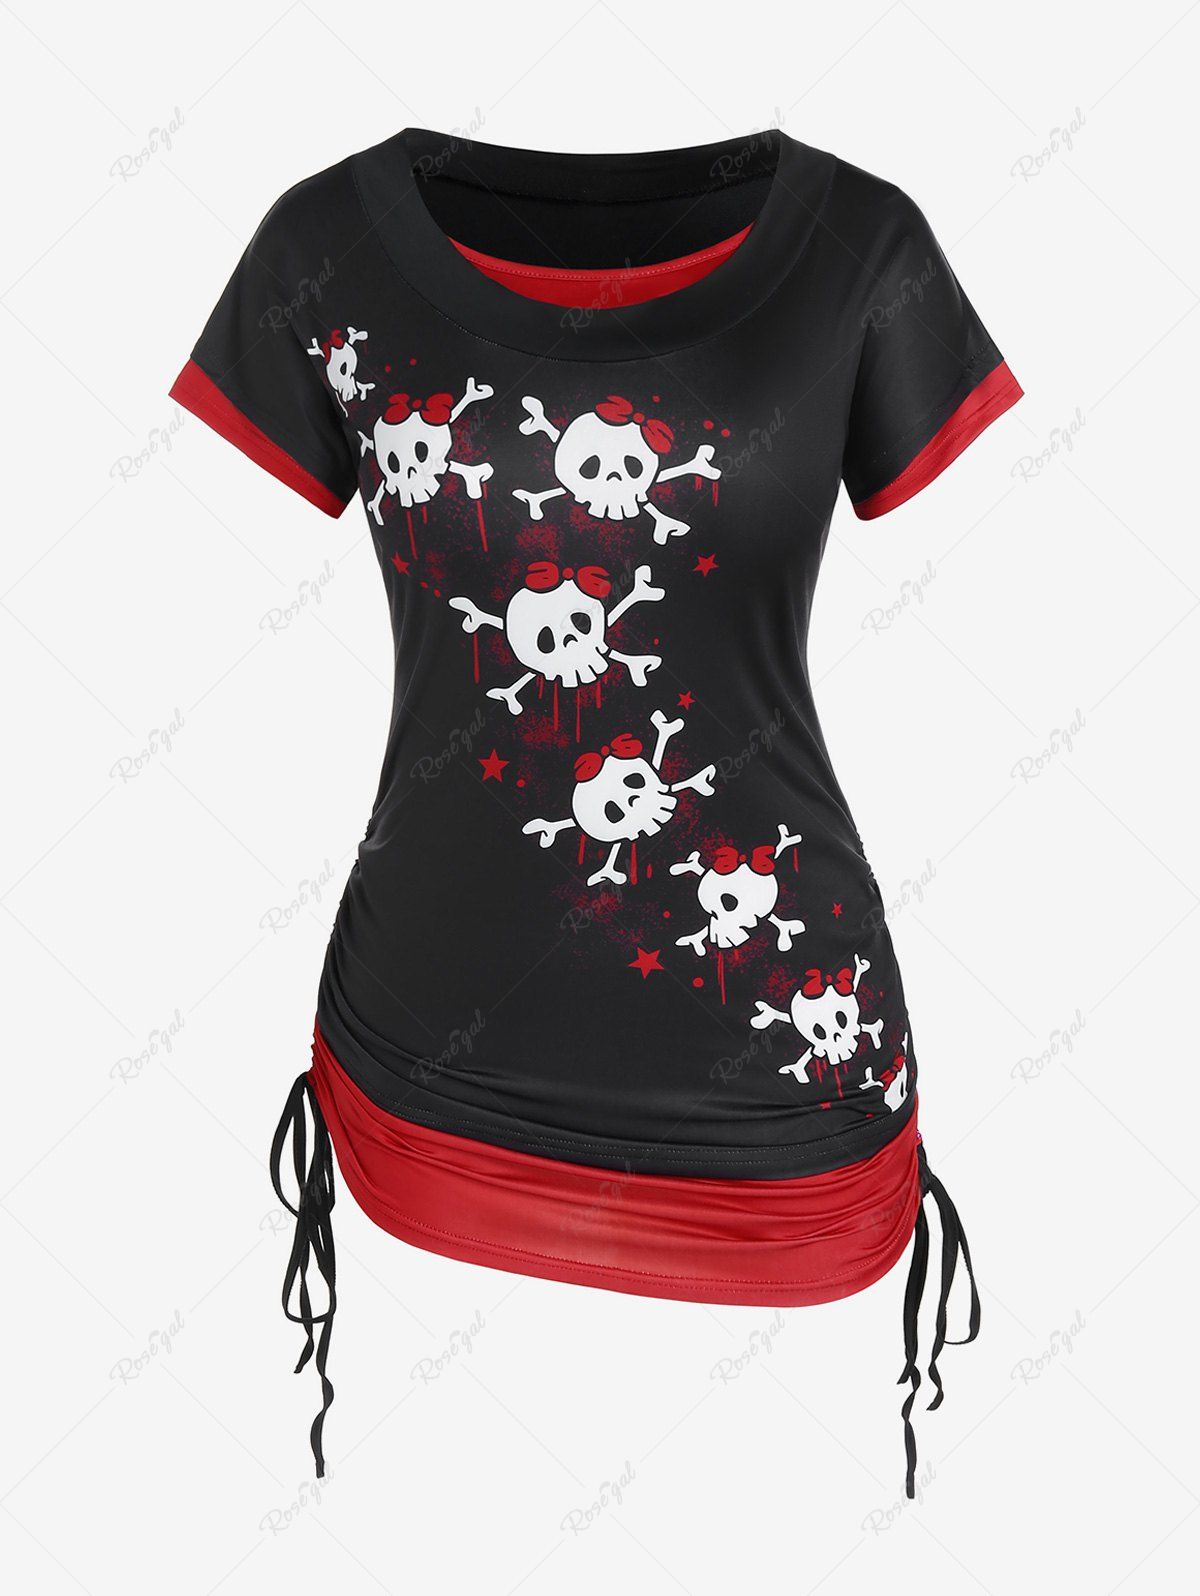 Fashion Plus Size Gothic Skull Print Cinched 2 in 1 Tee  